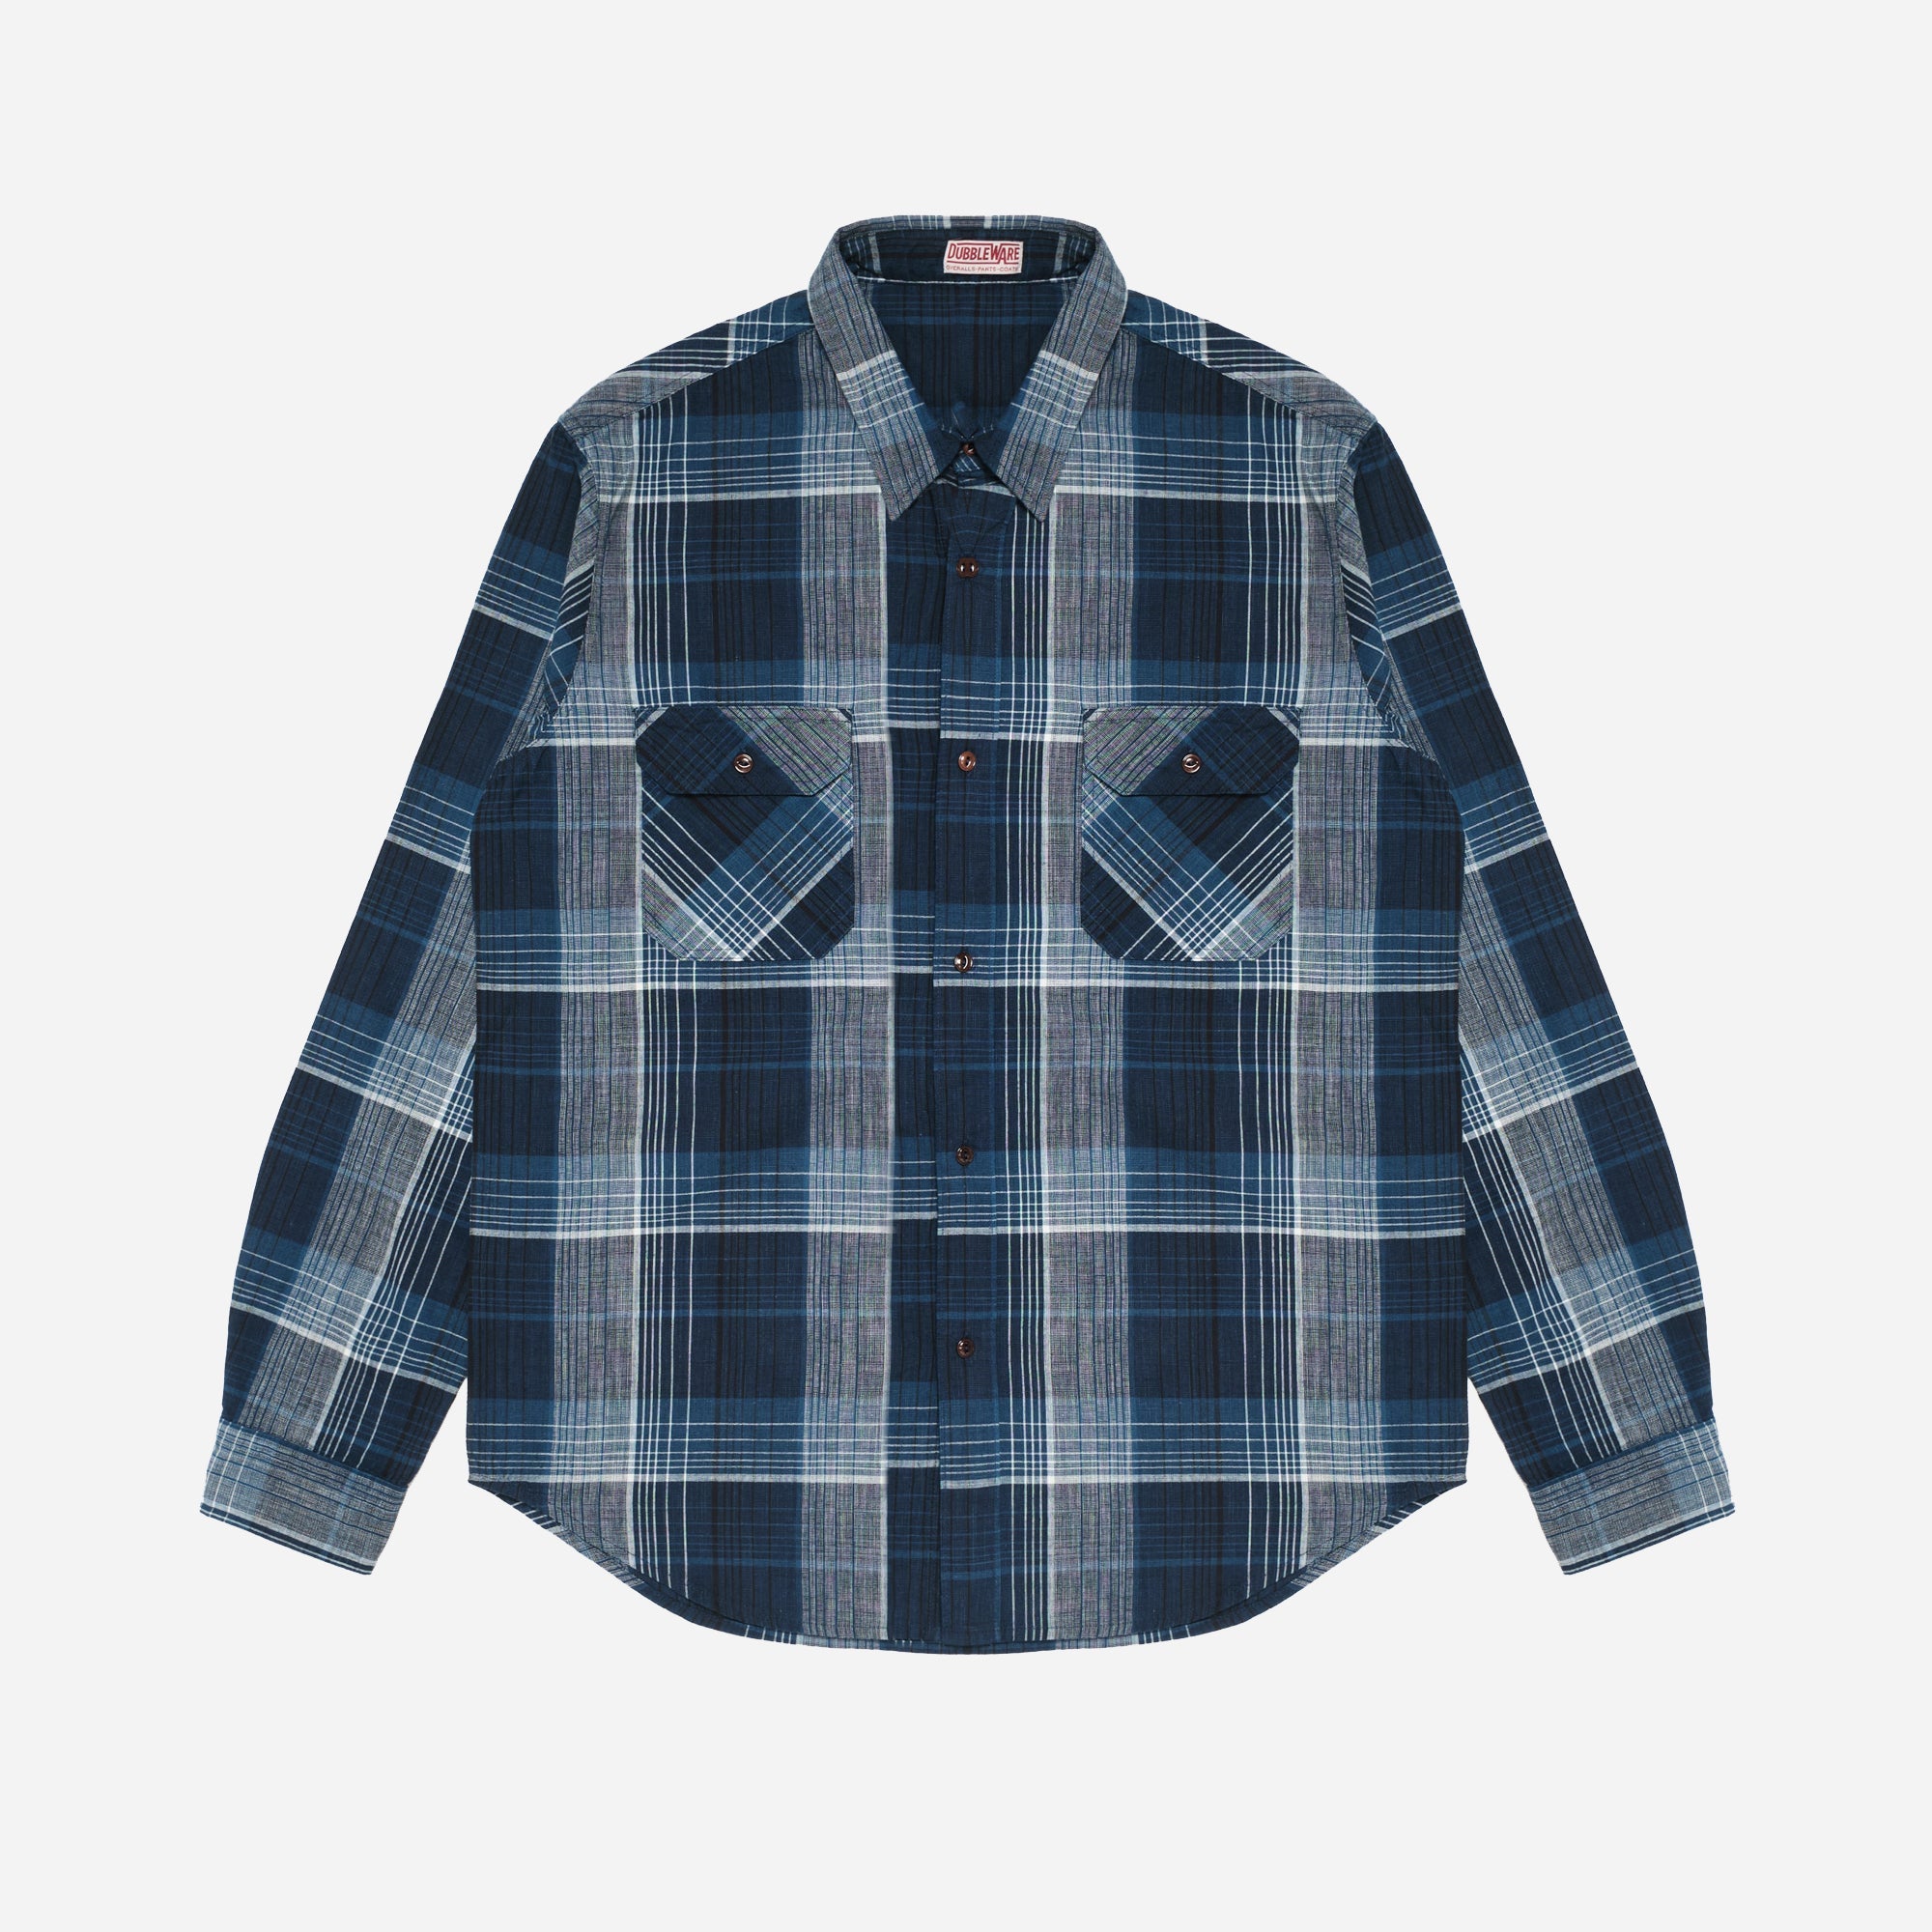 OMBRE PLAID BUTTON DOWN SHIRT MADE IN ITALY - NAVY/BLUE CHECK